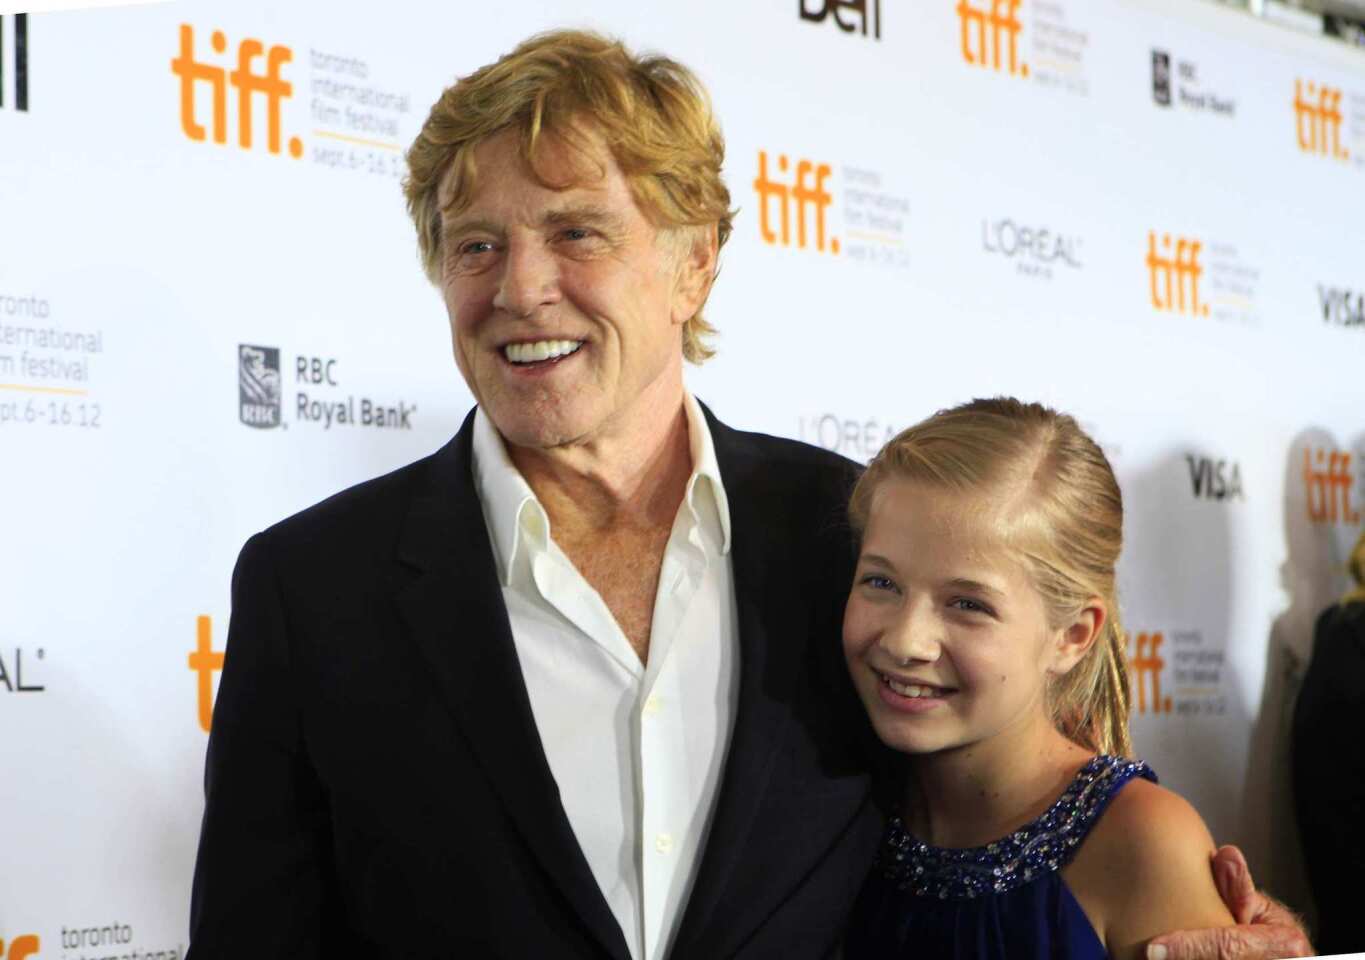 Robert Redford stars, produces and directs "The Company You Keep," which premiered at the festival. Opera sensation Jackie Evancho makes her acting debut in the film as Redford's daughter.